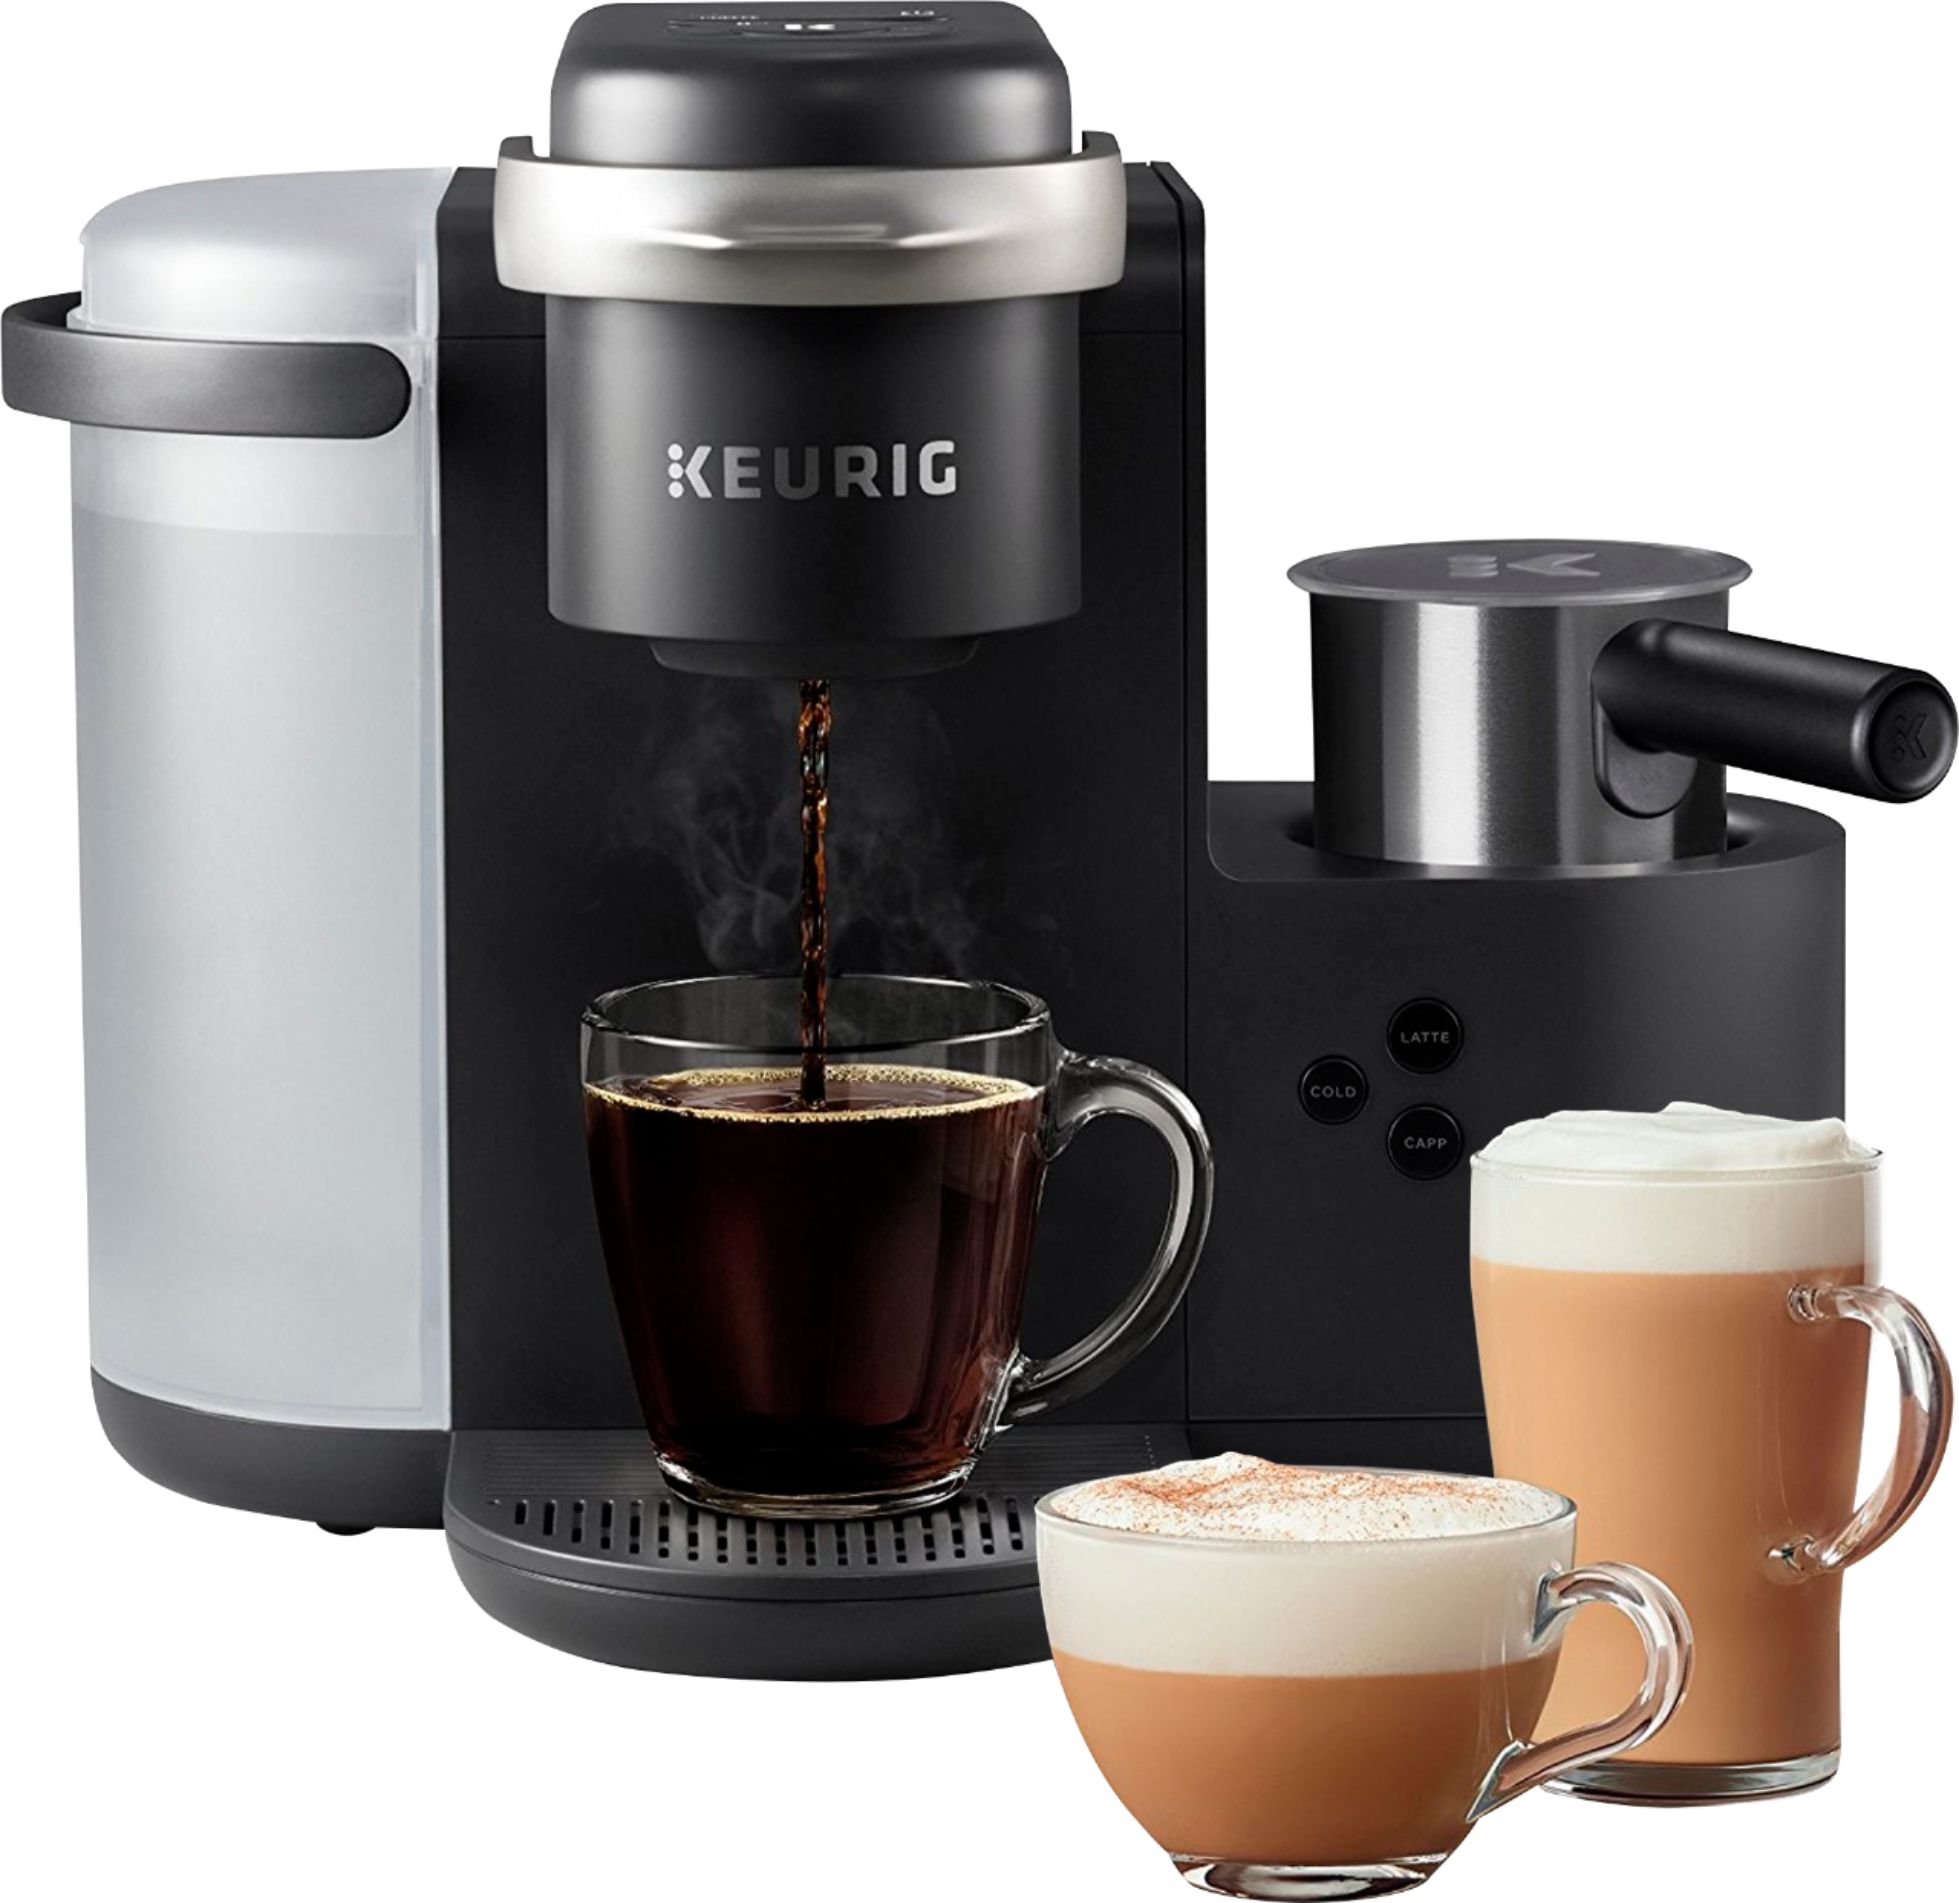 Keurig K-Cafe Single Serve K-Cup Coffee, Latte and Cappuccino Maker